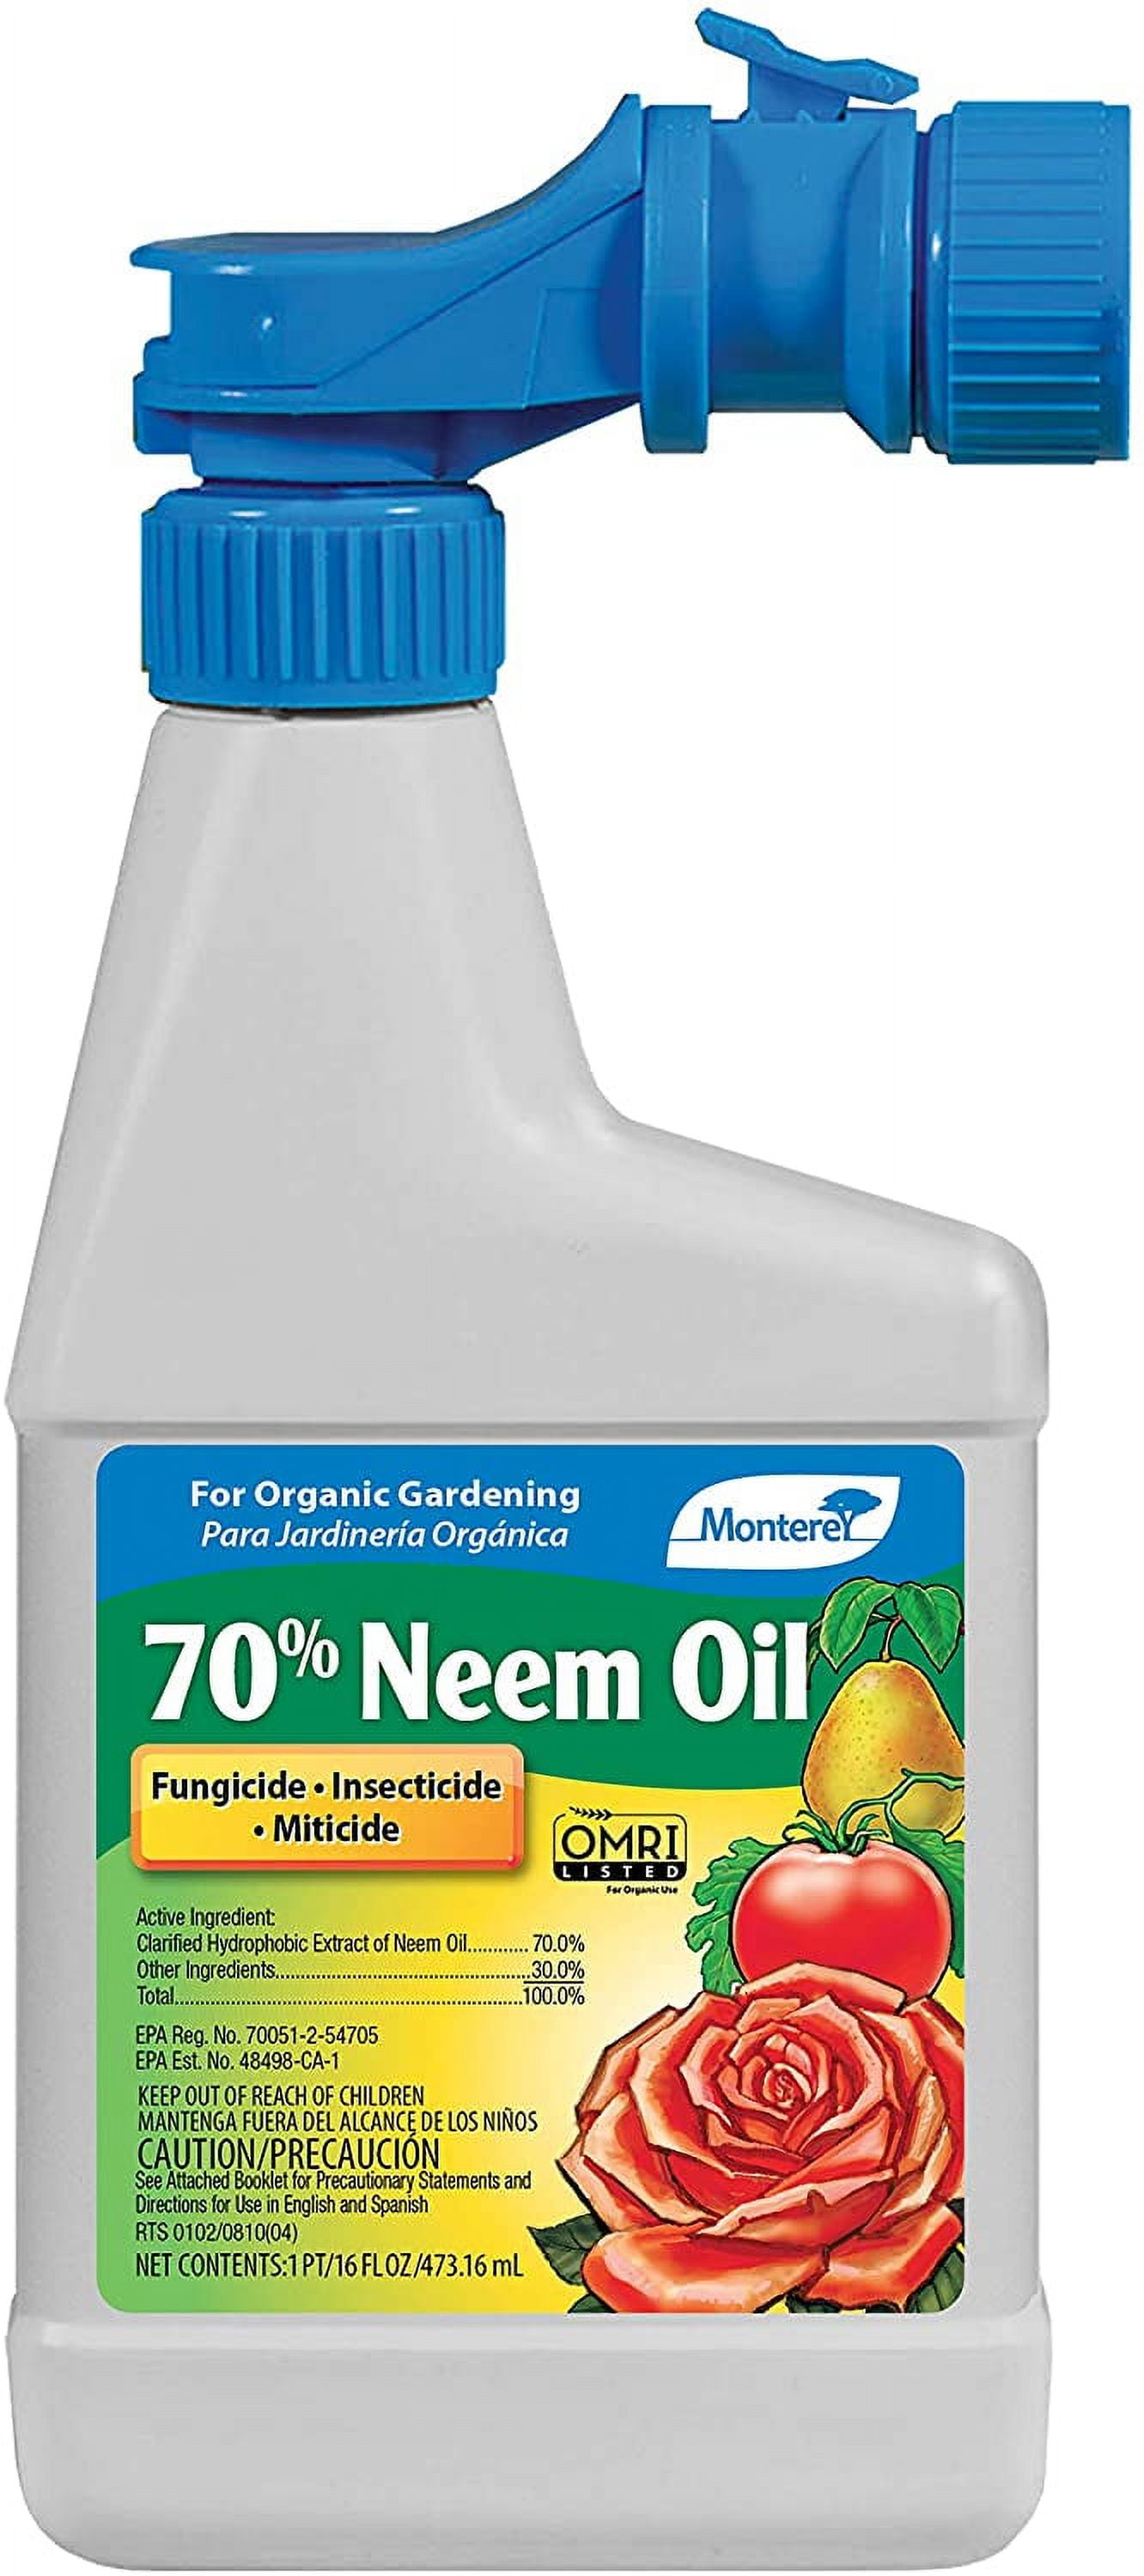 Bfg2 Mlgnlg6145 16 Oz 70 Percent Neem Oil Insecticide Miticide Fun For Pet